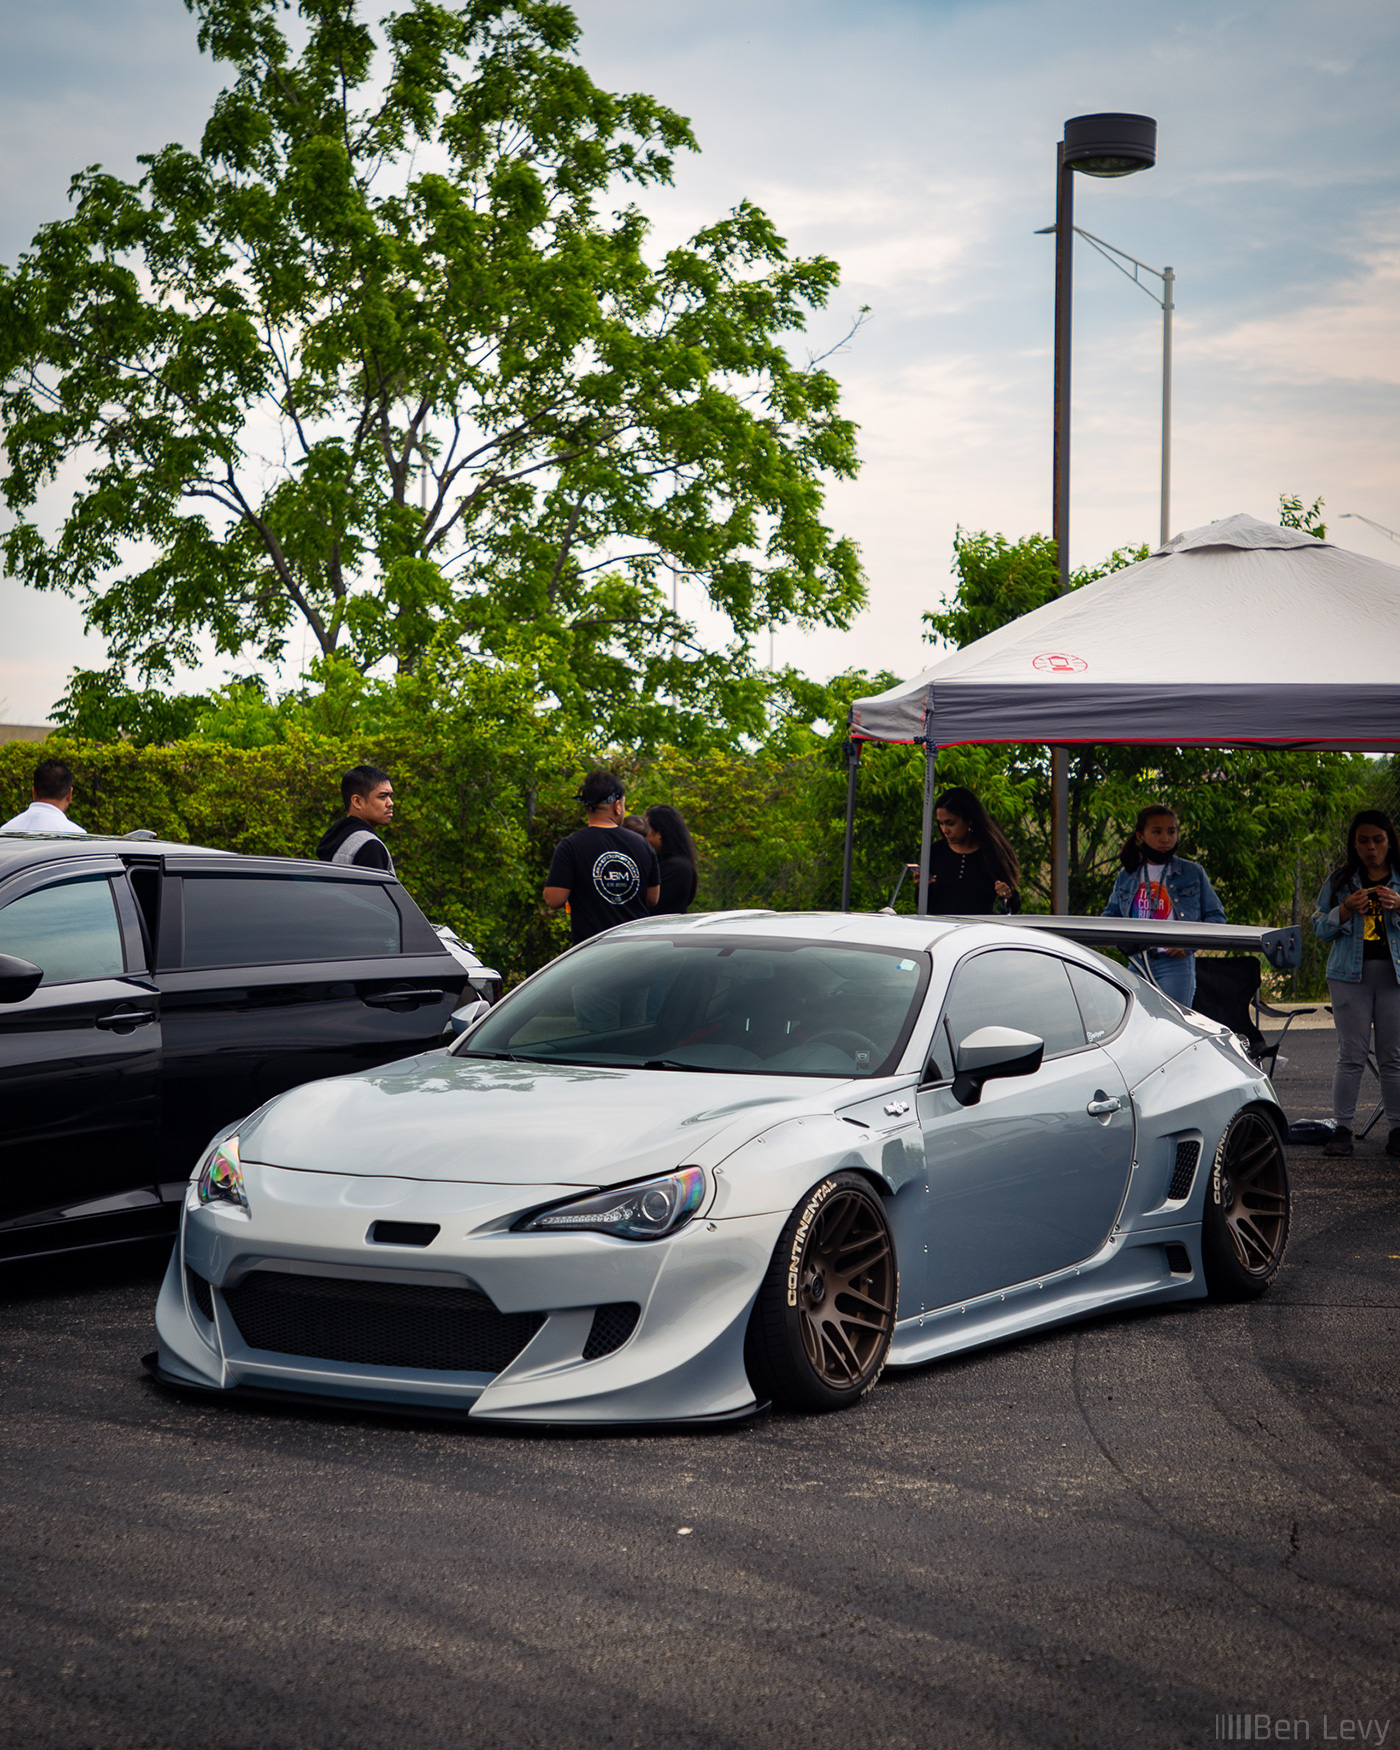 Silver Scion FR-S at Cars and Culture Car Show